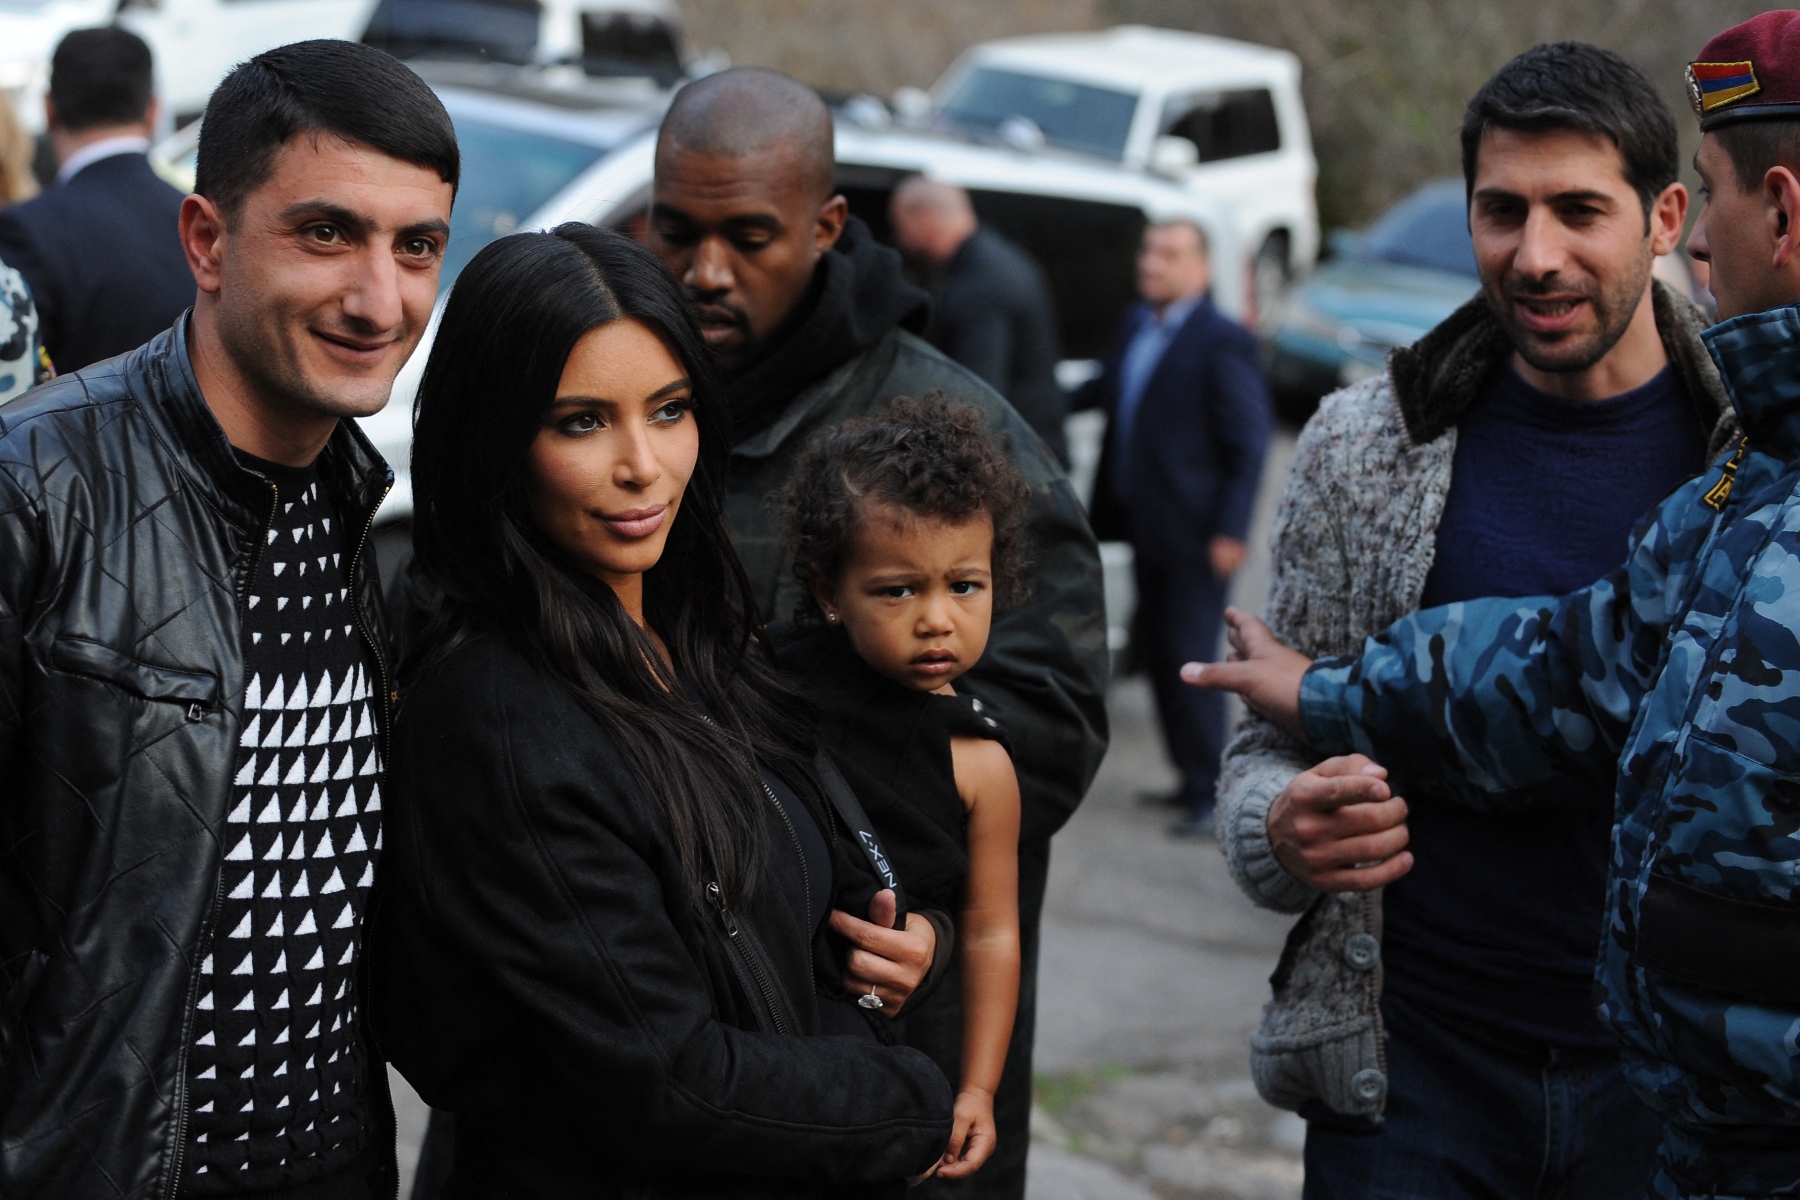 5 interesting facts about the school Kim Kardashian's daughter attends